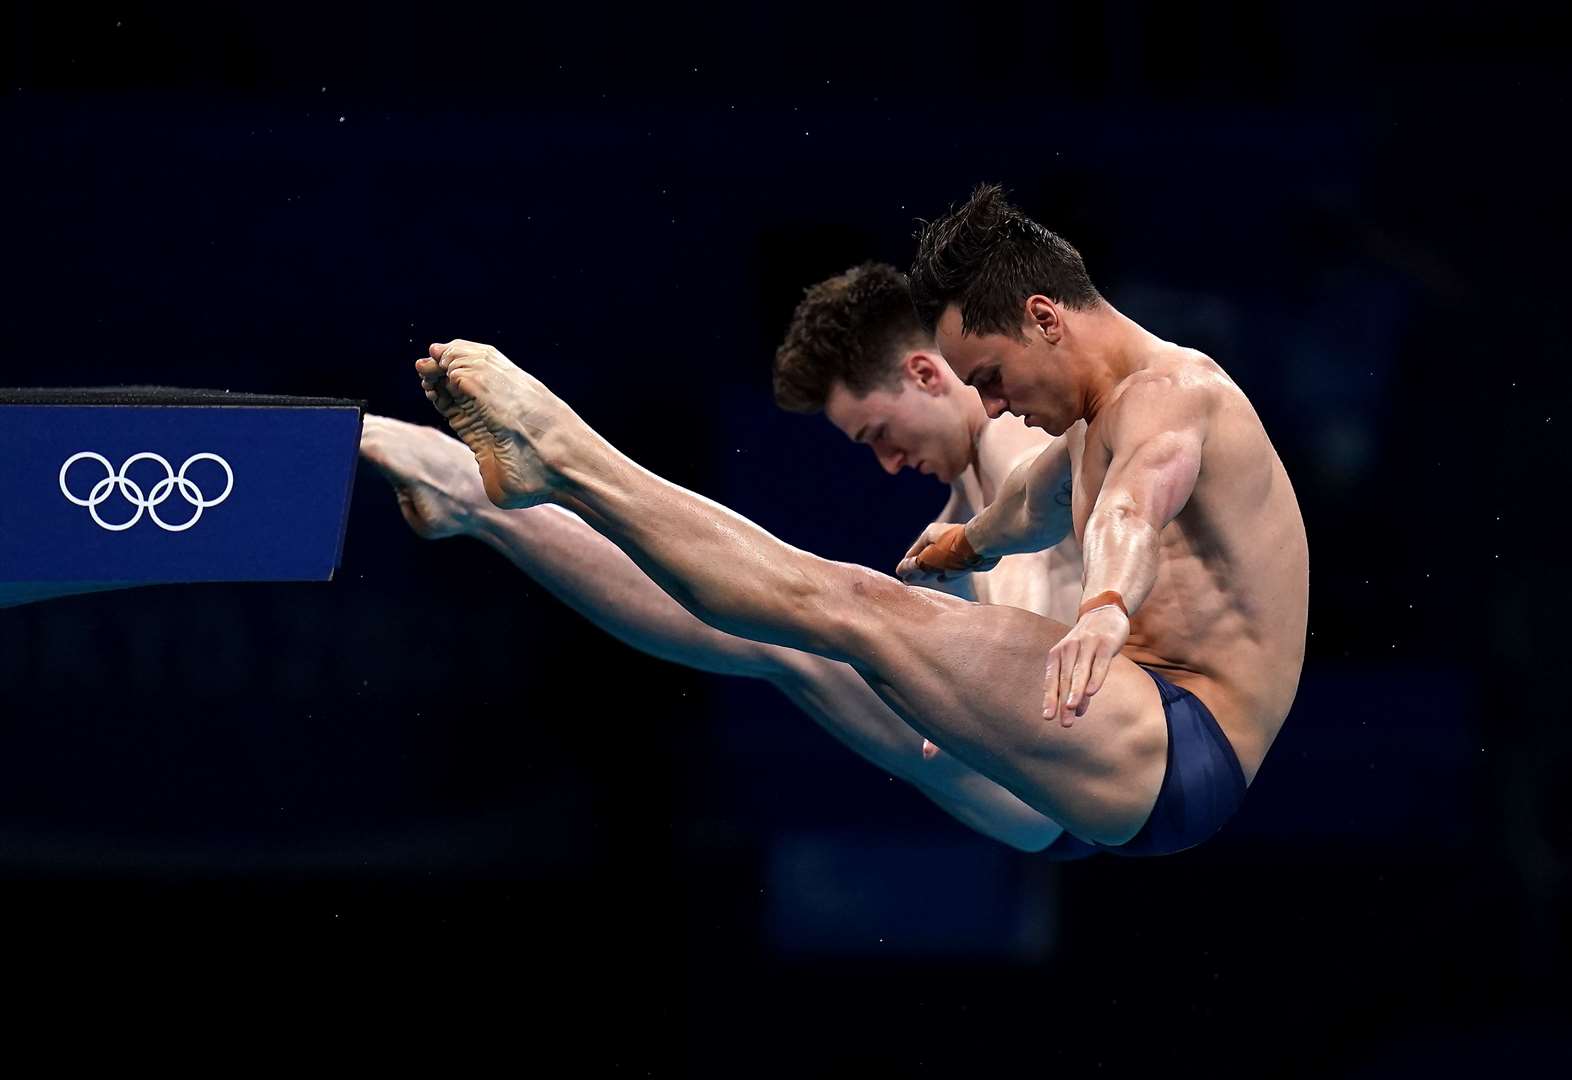 Tom Daley and Matty Lee during the men’s synchronised 10m platform final (Adam Davy/PA)